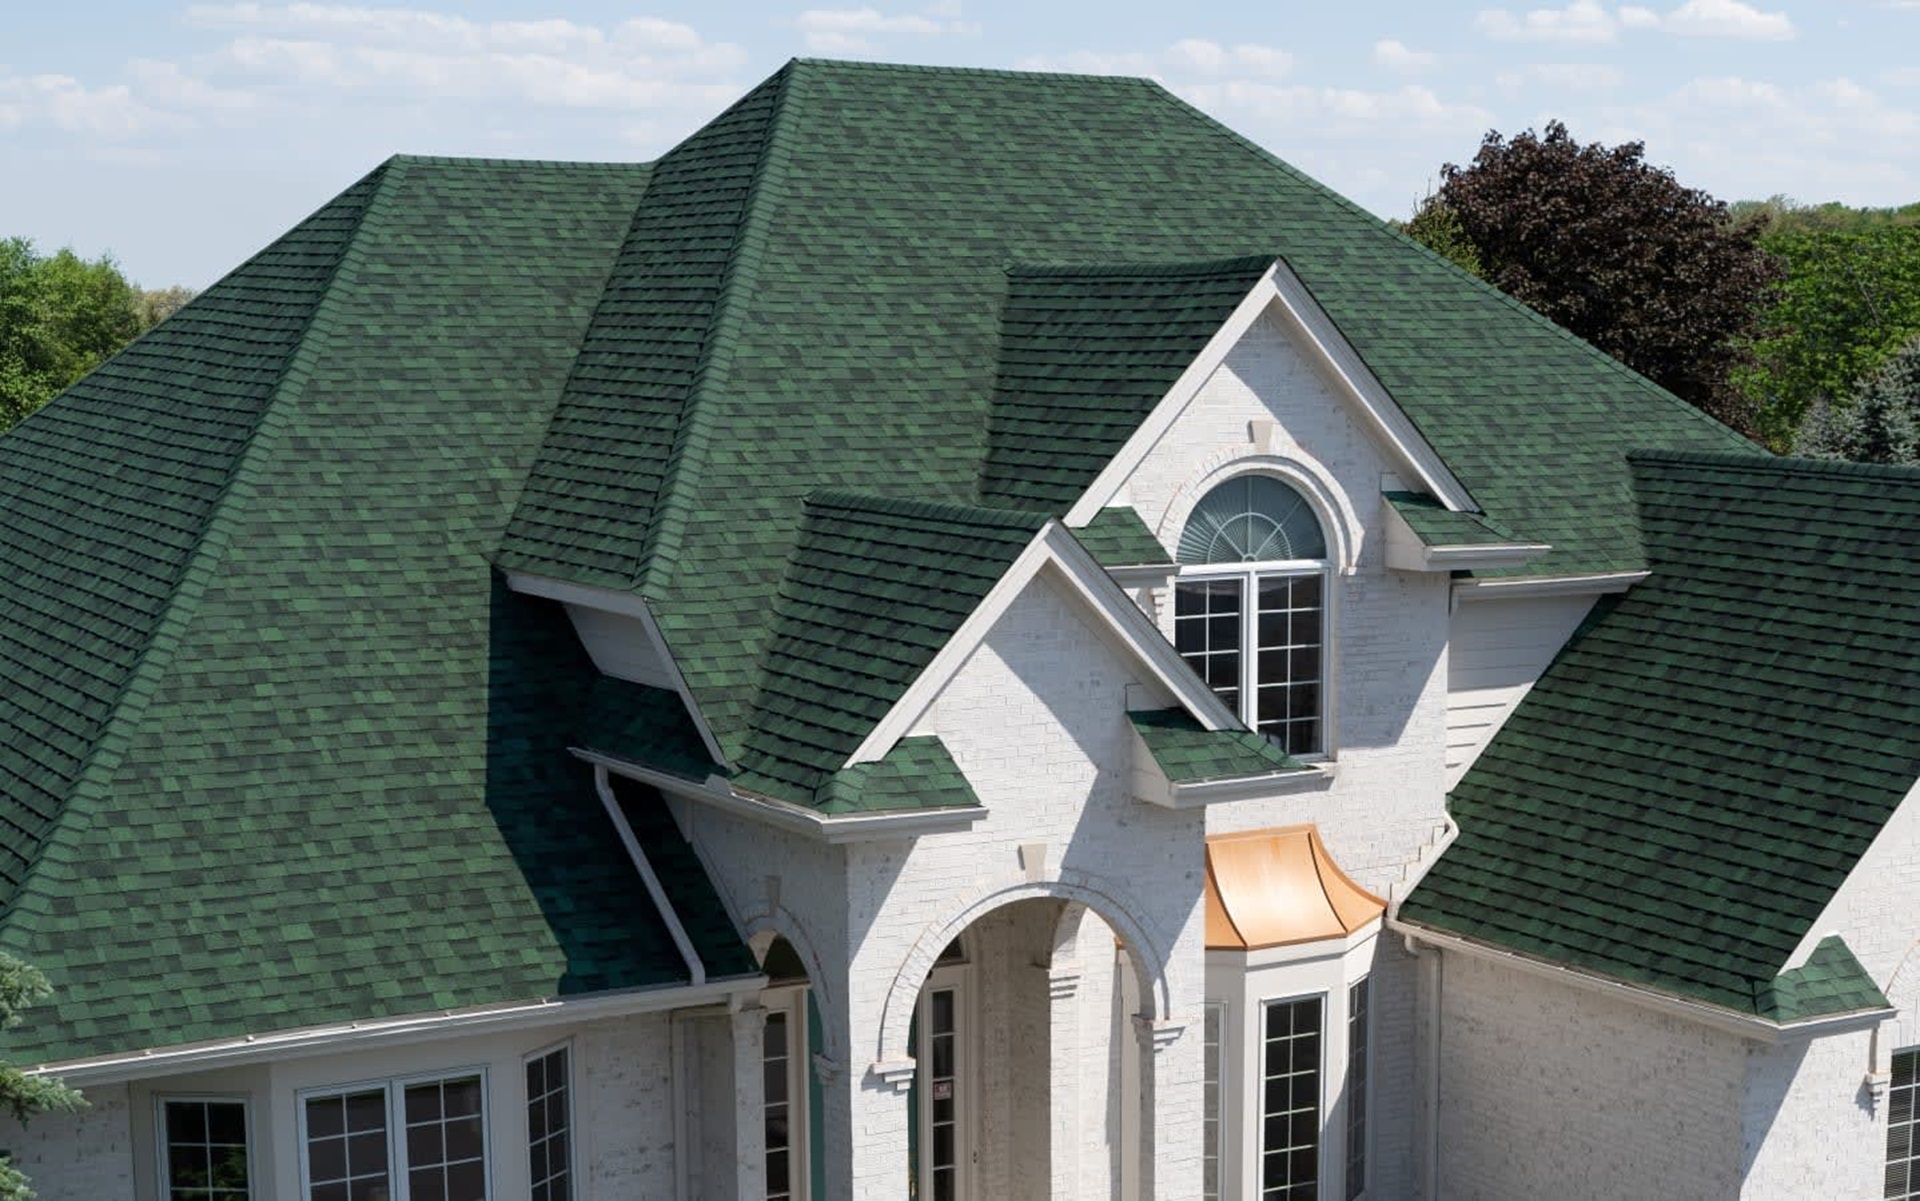 Comercial Roofing Services in Dana Point, California